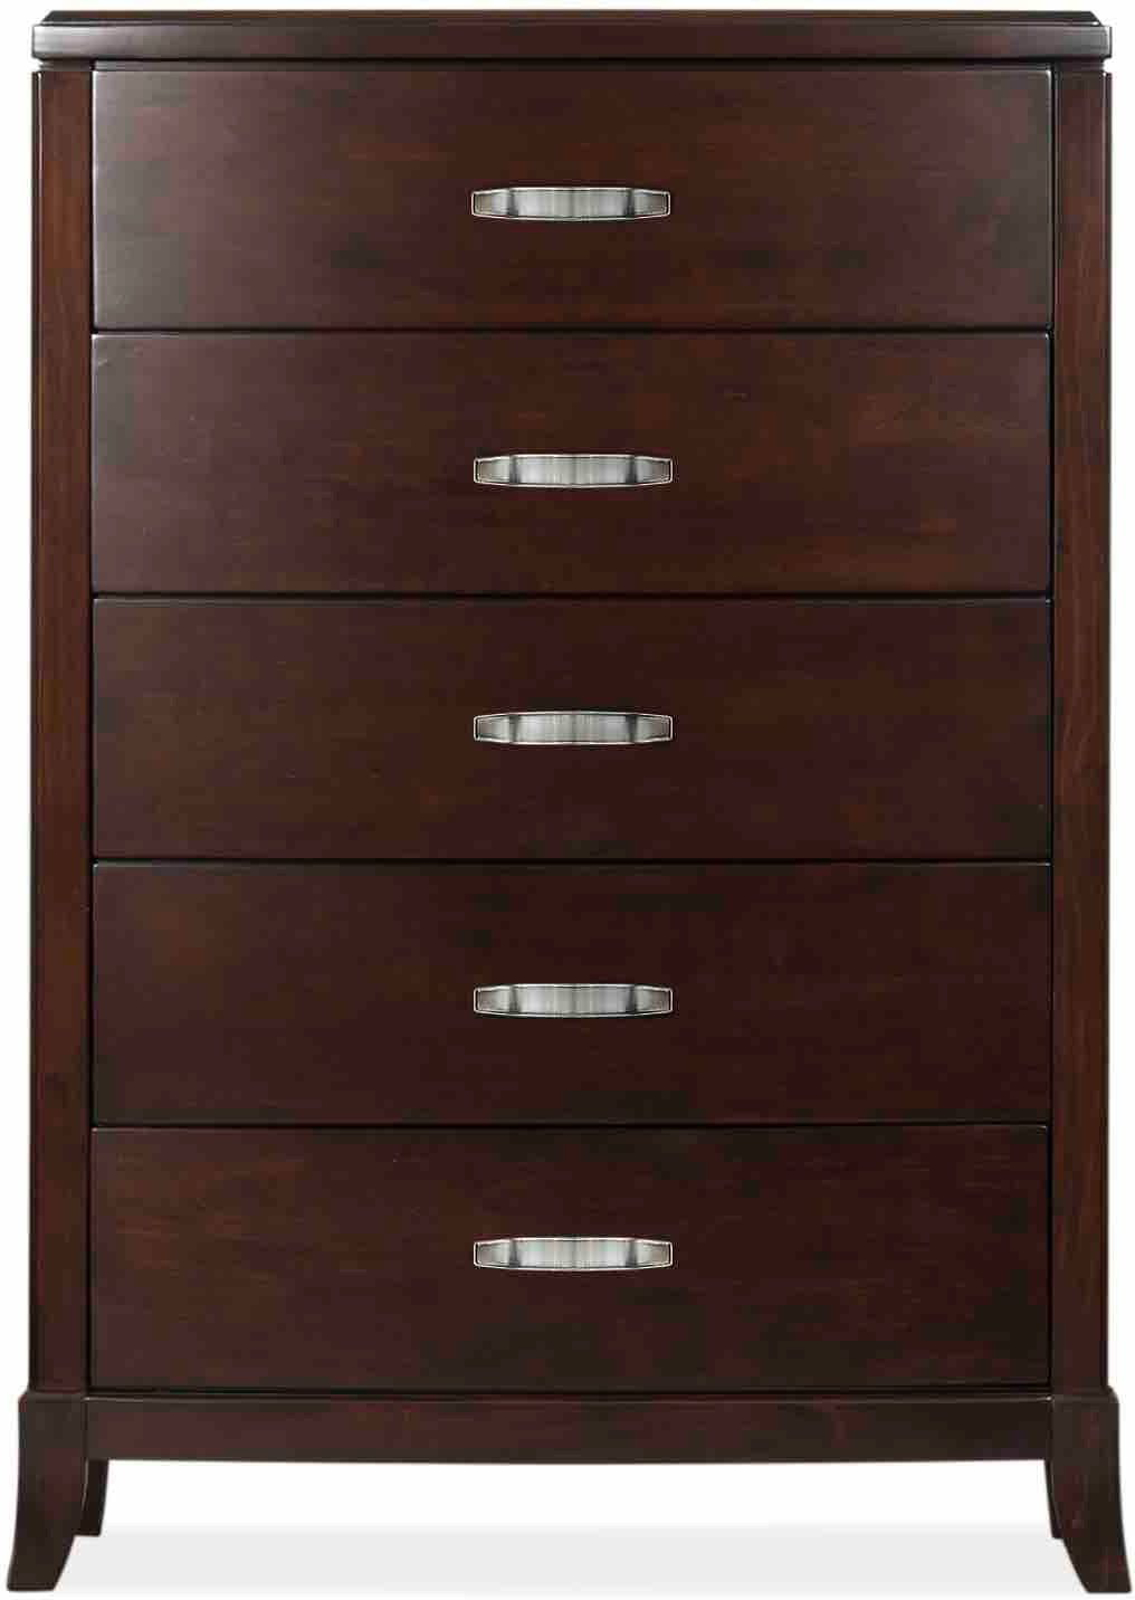 Picture of Elements Delaney Chest of Drawers